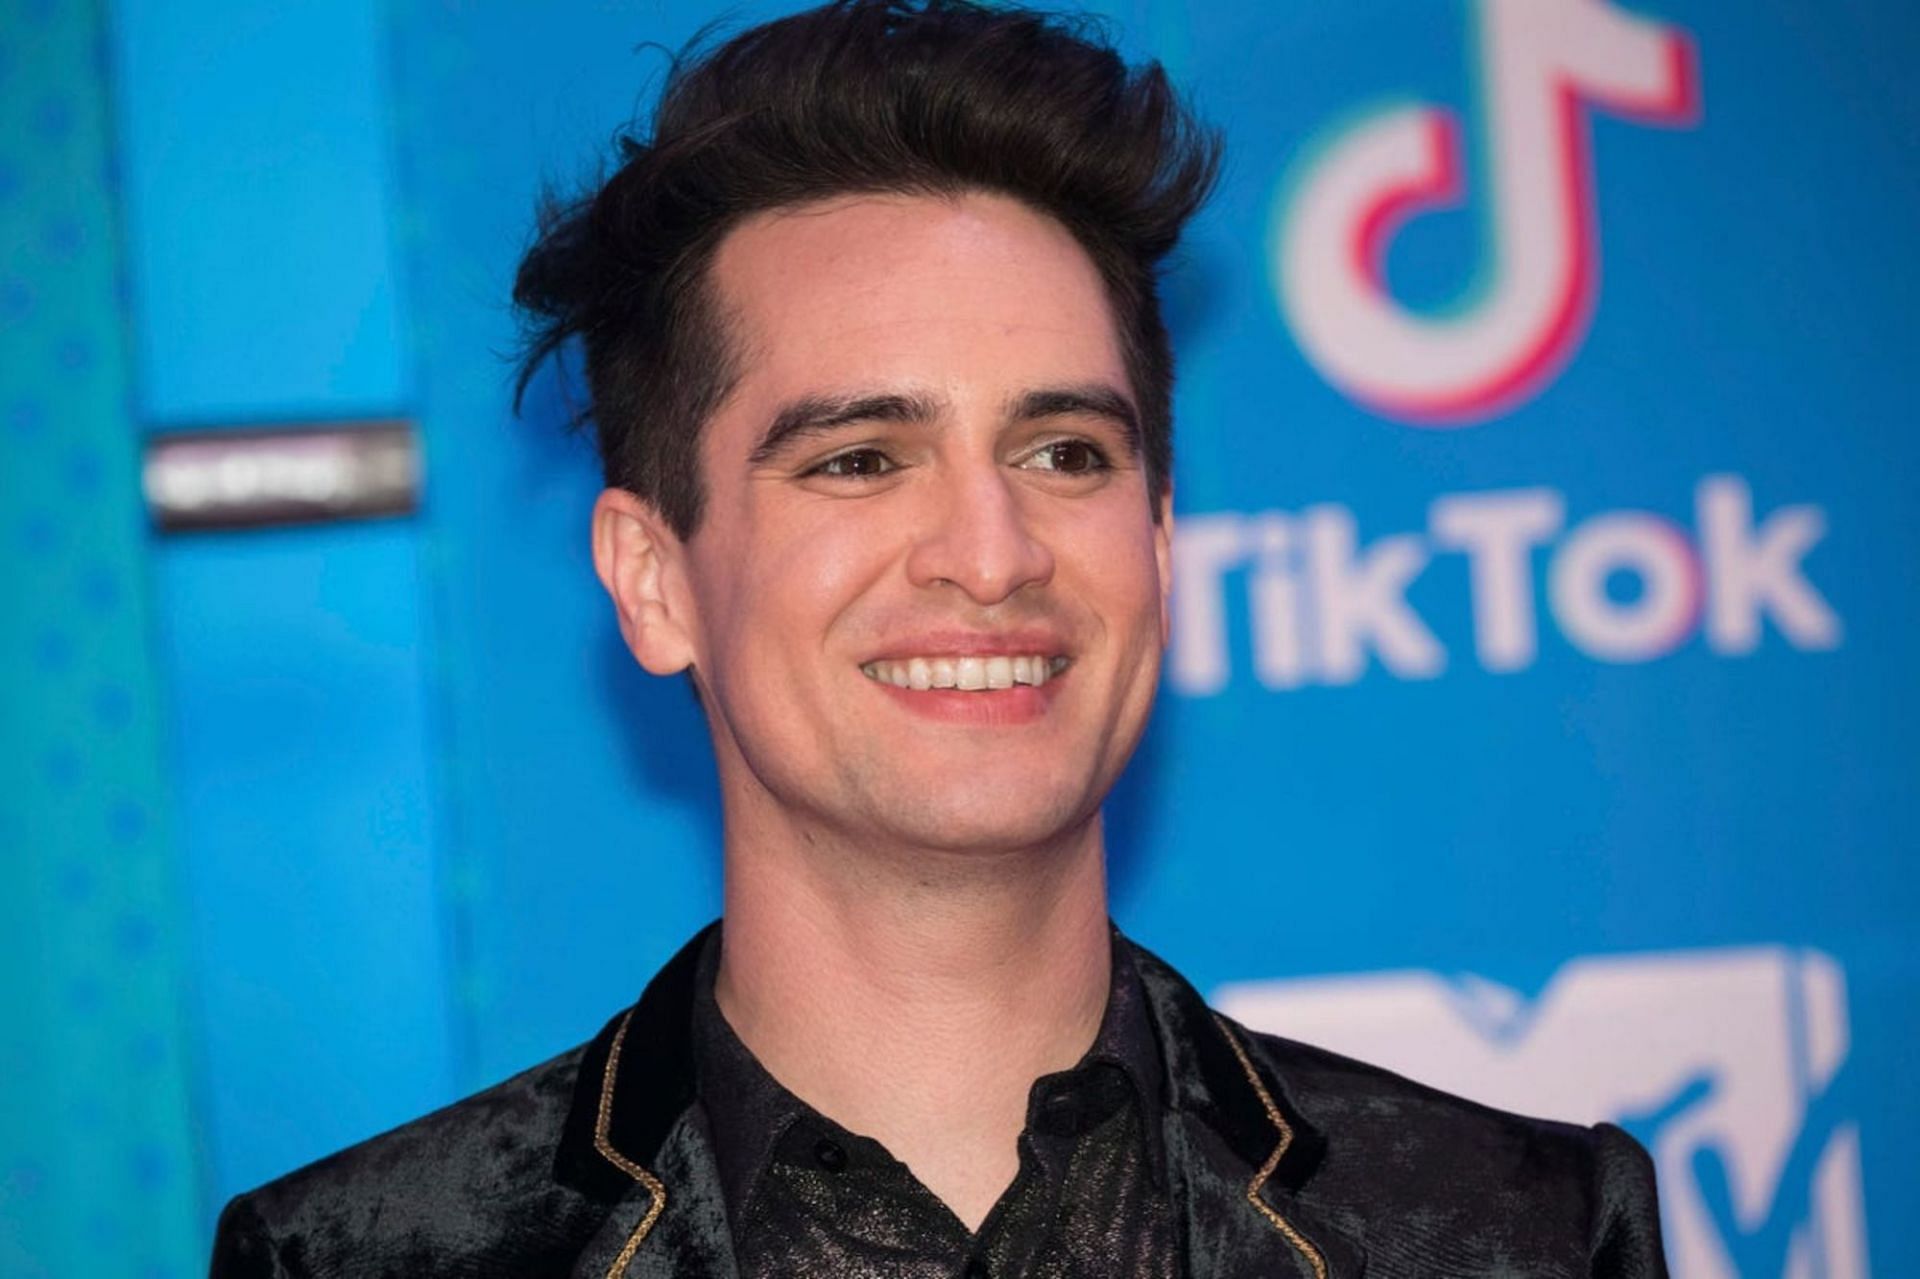 Panic! At the Disco are separating as Brendon Urie announces he is expecting his first child (Image via Getty Images)